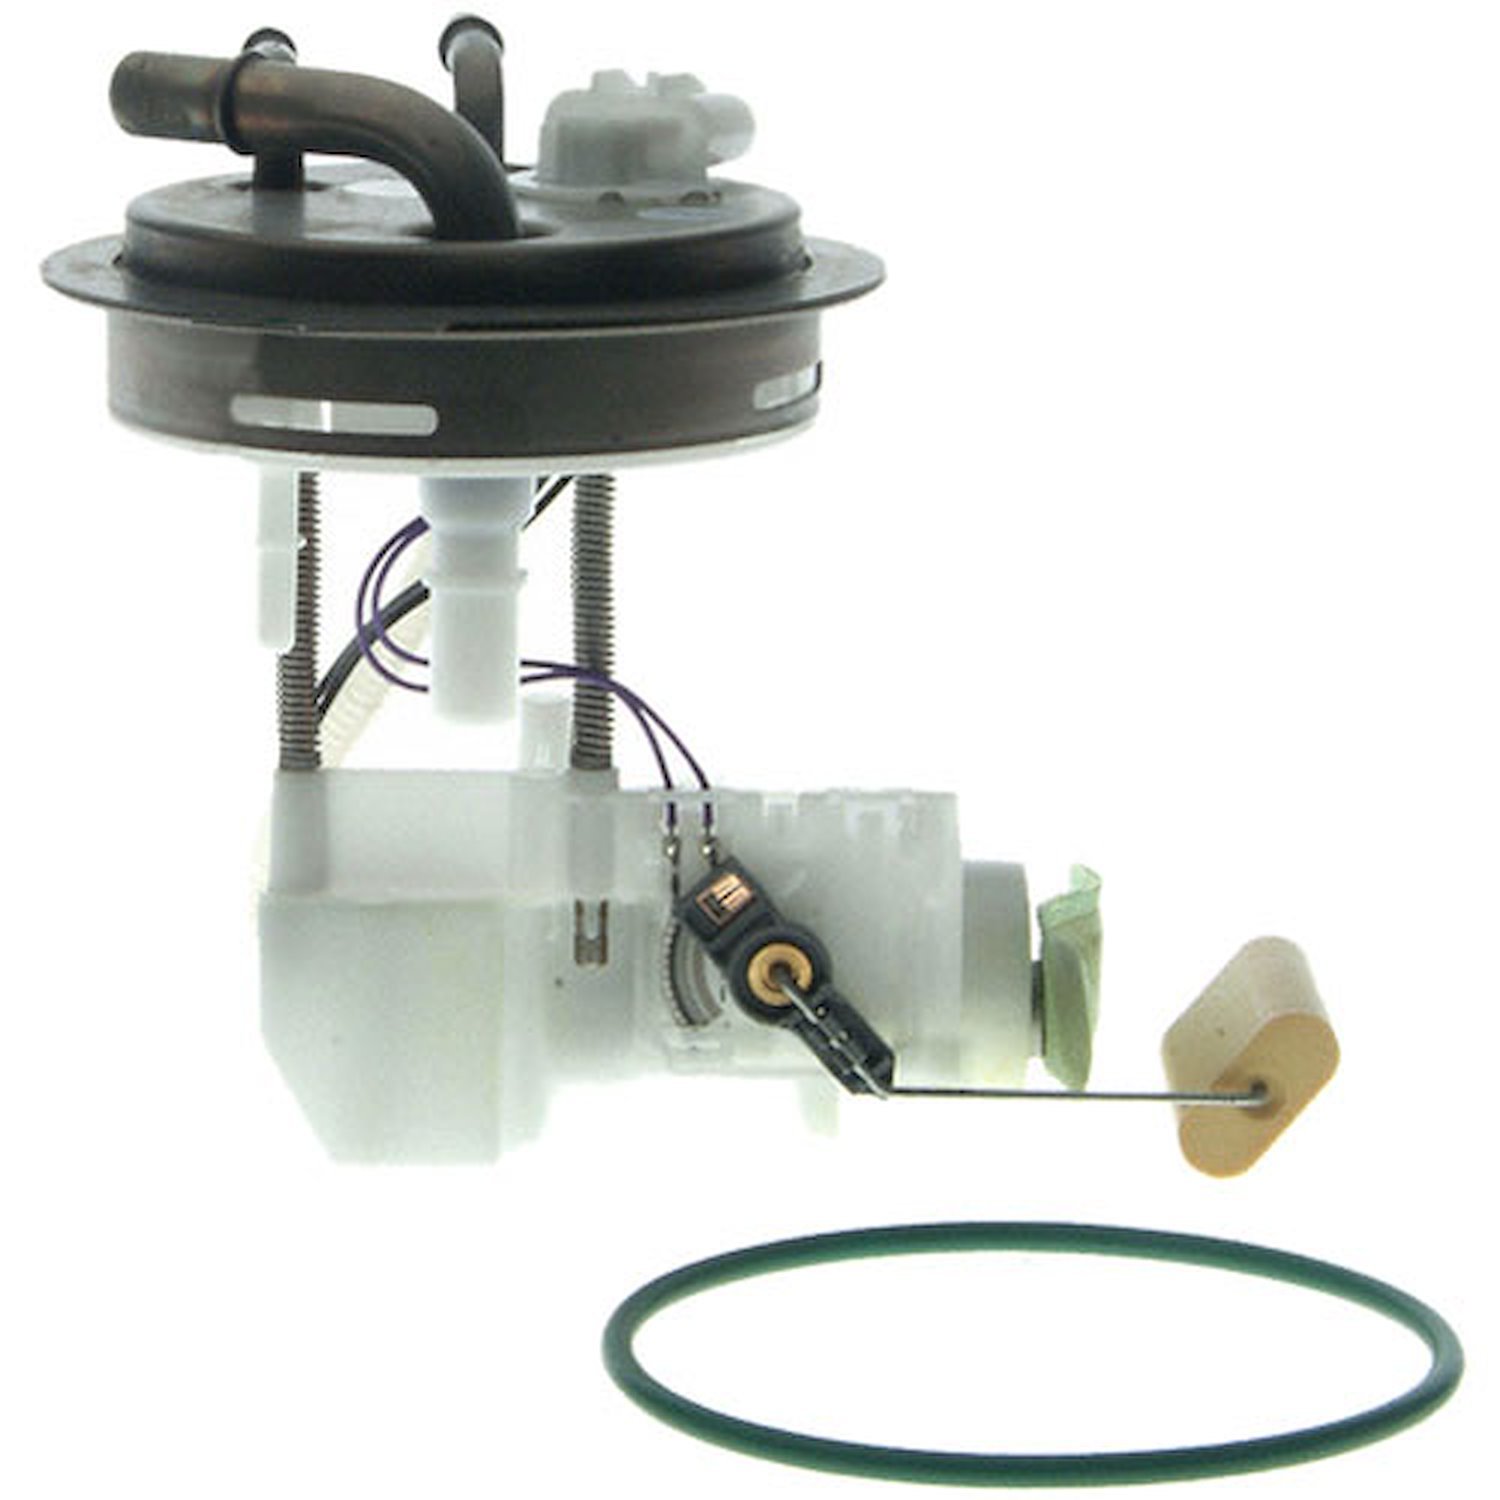 OE GM Replacement Electric Fuel Pump Module Assembly 2004-07 Chevrolet Avalanche 2500/Suburban 2500 6.0L/8.1L V8